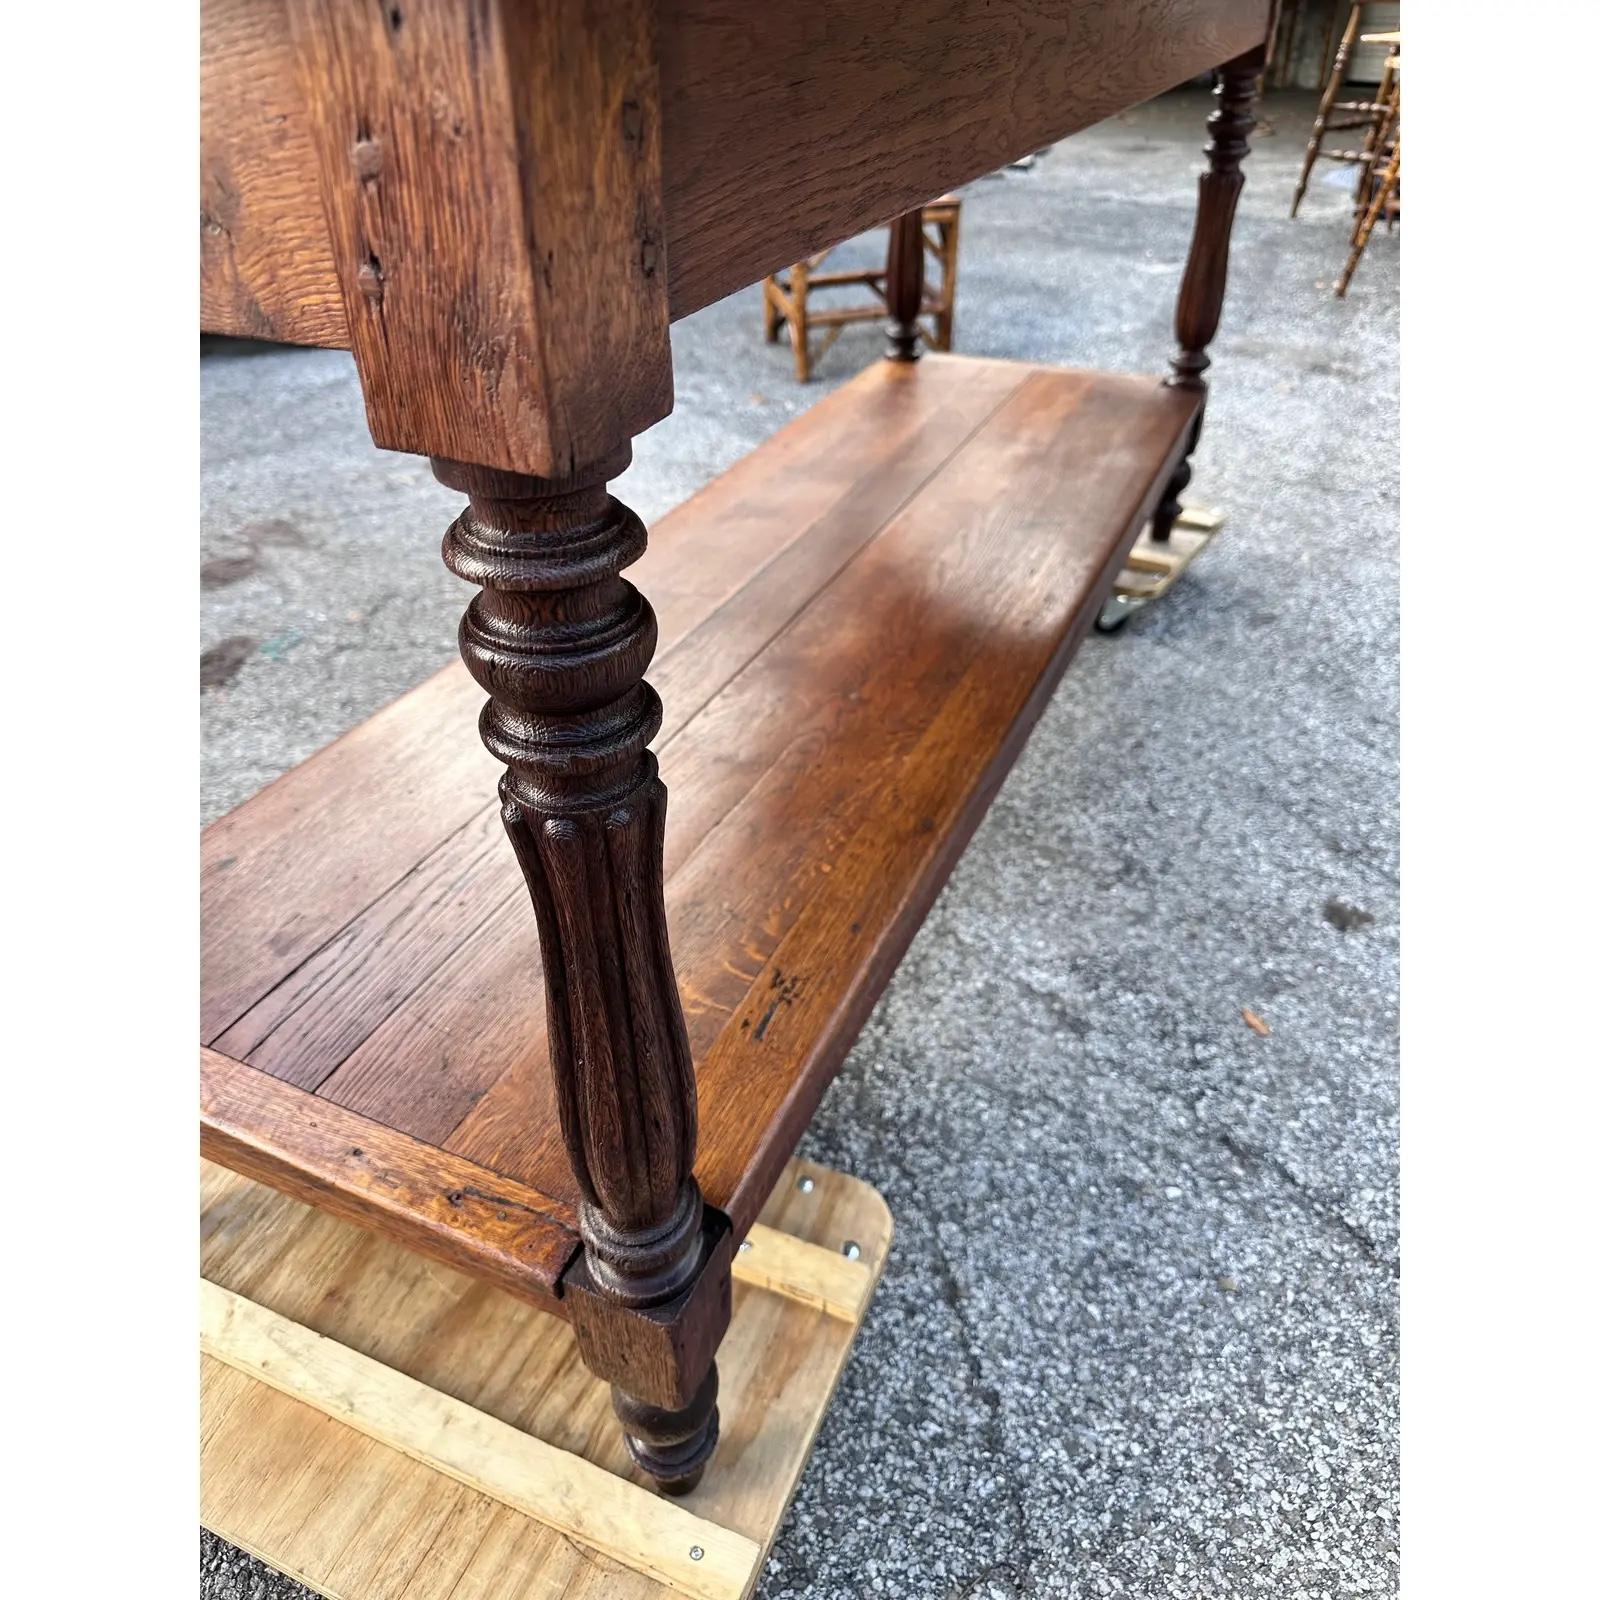 This is a beautiful 19th century two-tiered English table! The wood is dark and glossy, and the reeded legs add the perfect touch of refined elegance. This piece would have been originally used in an English merchant's shop to cut long bolts of